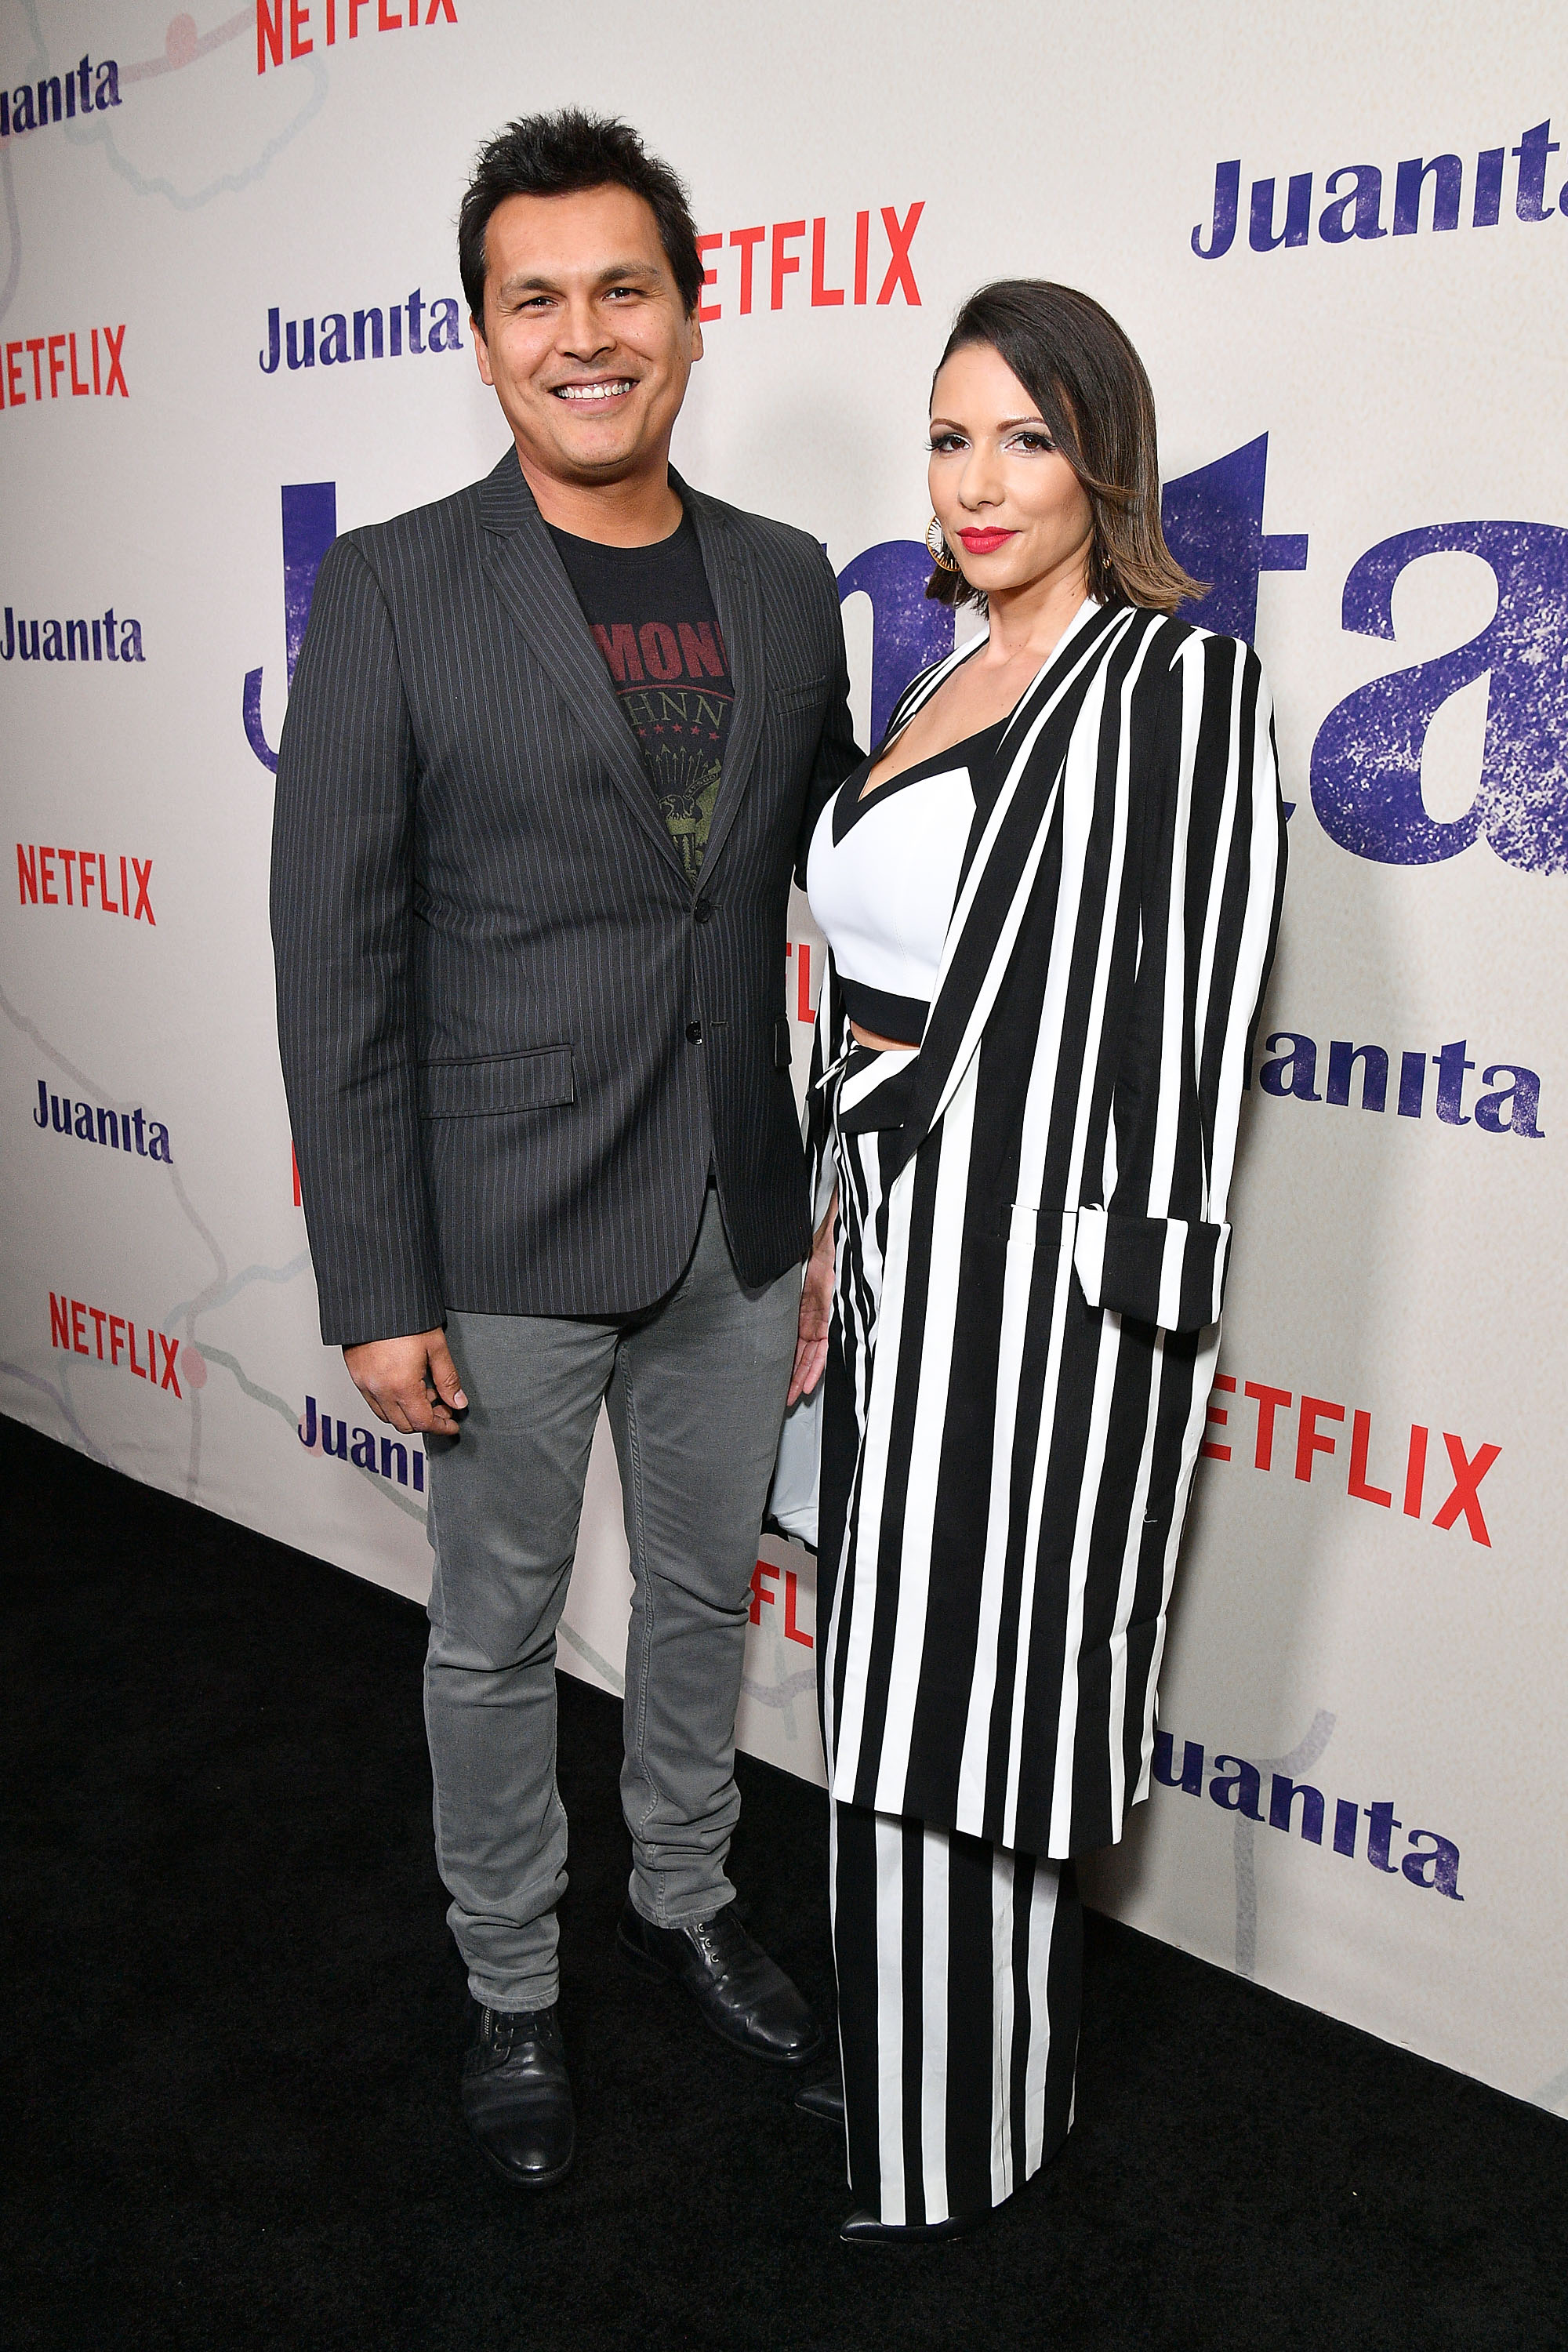 Adam Beach and Summer Tiger attend the "Juanita" New York screening at Metrograph on March 7, 2019, in New York City. | Source: Getty Images